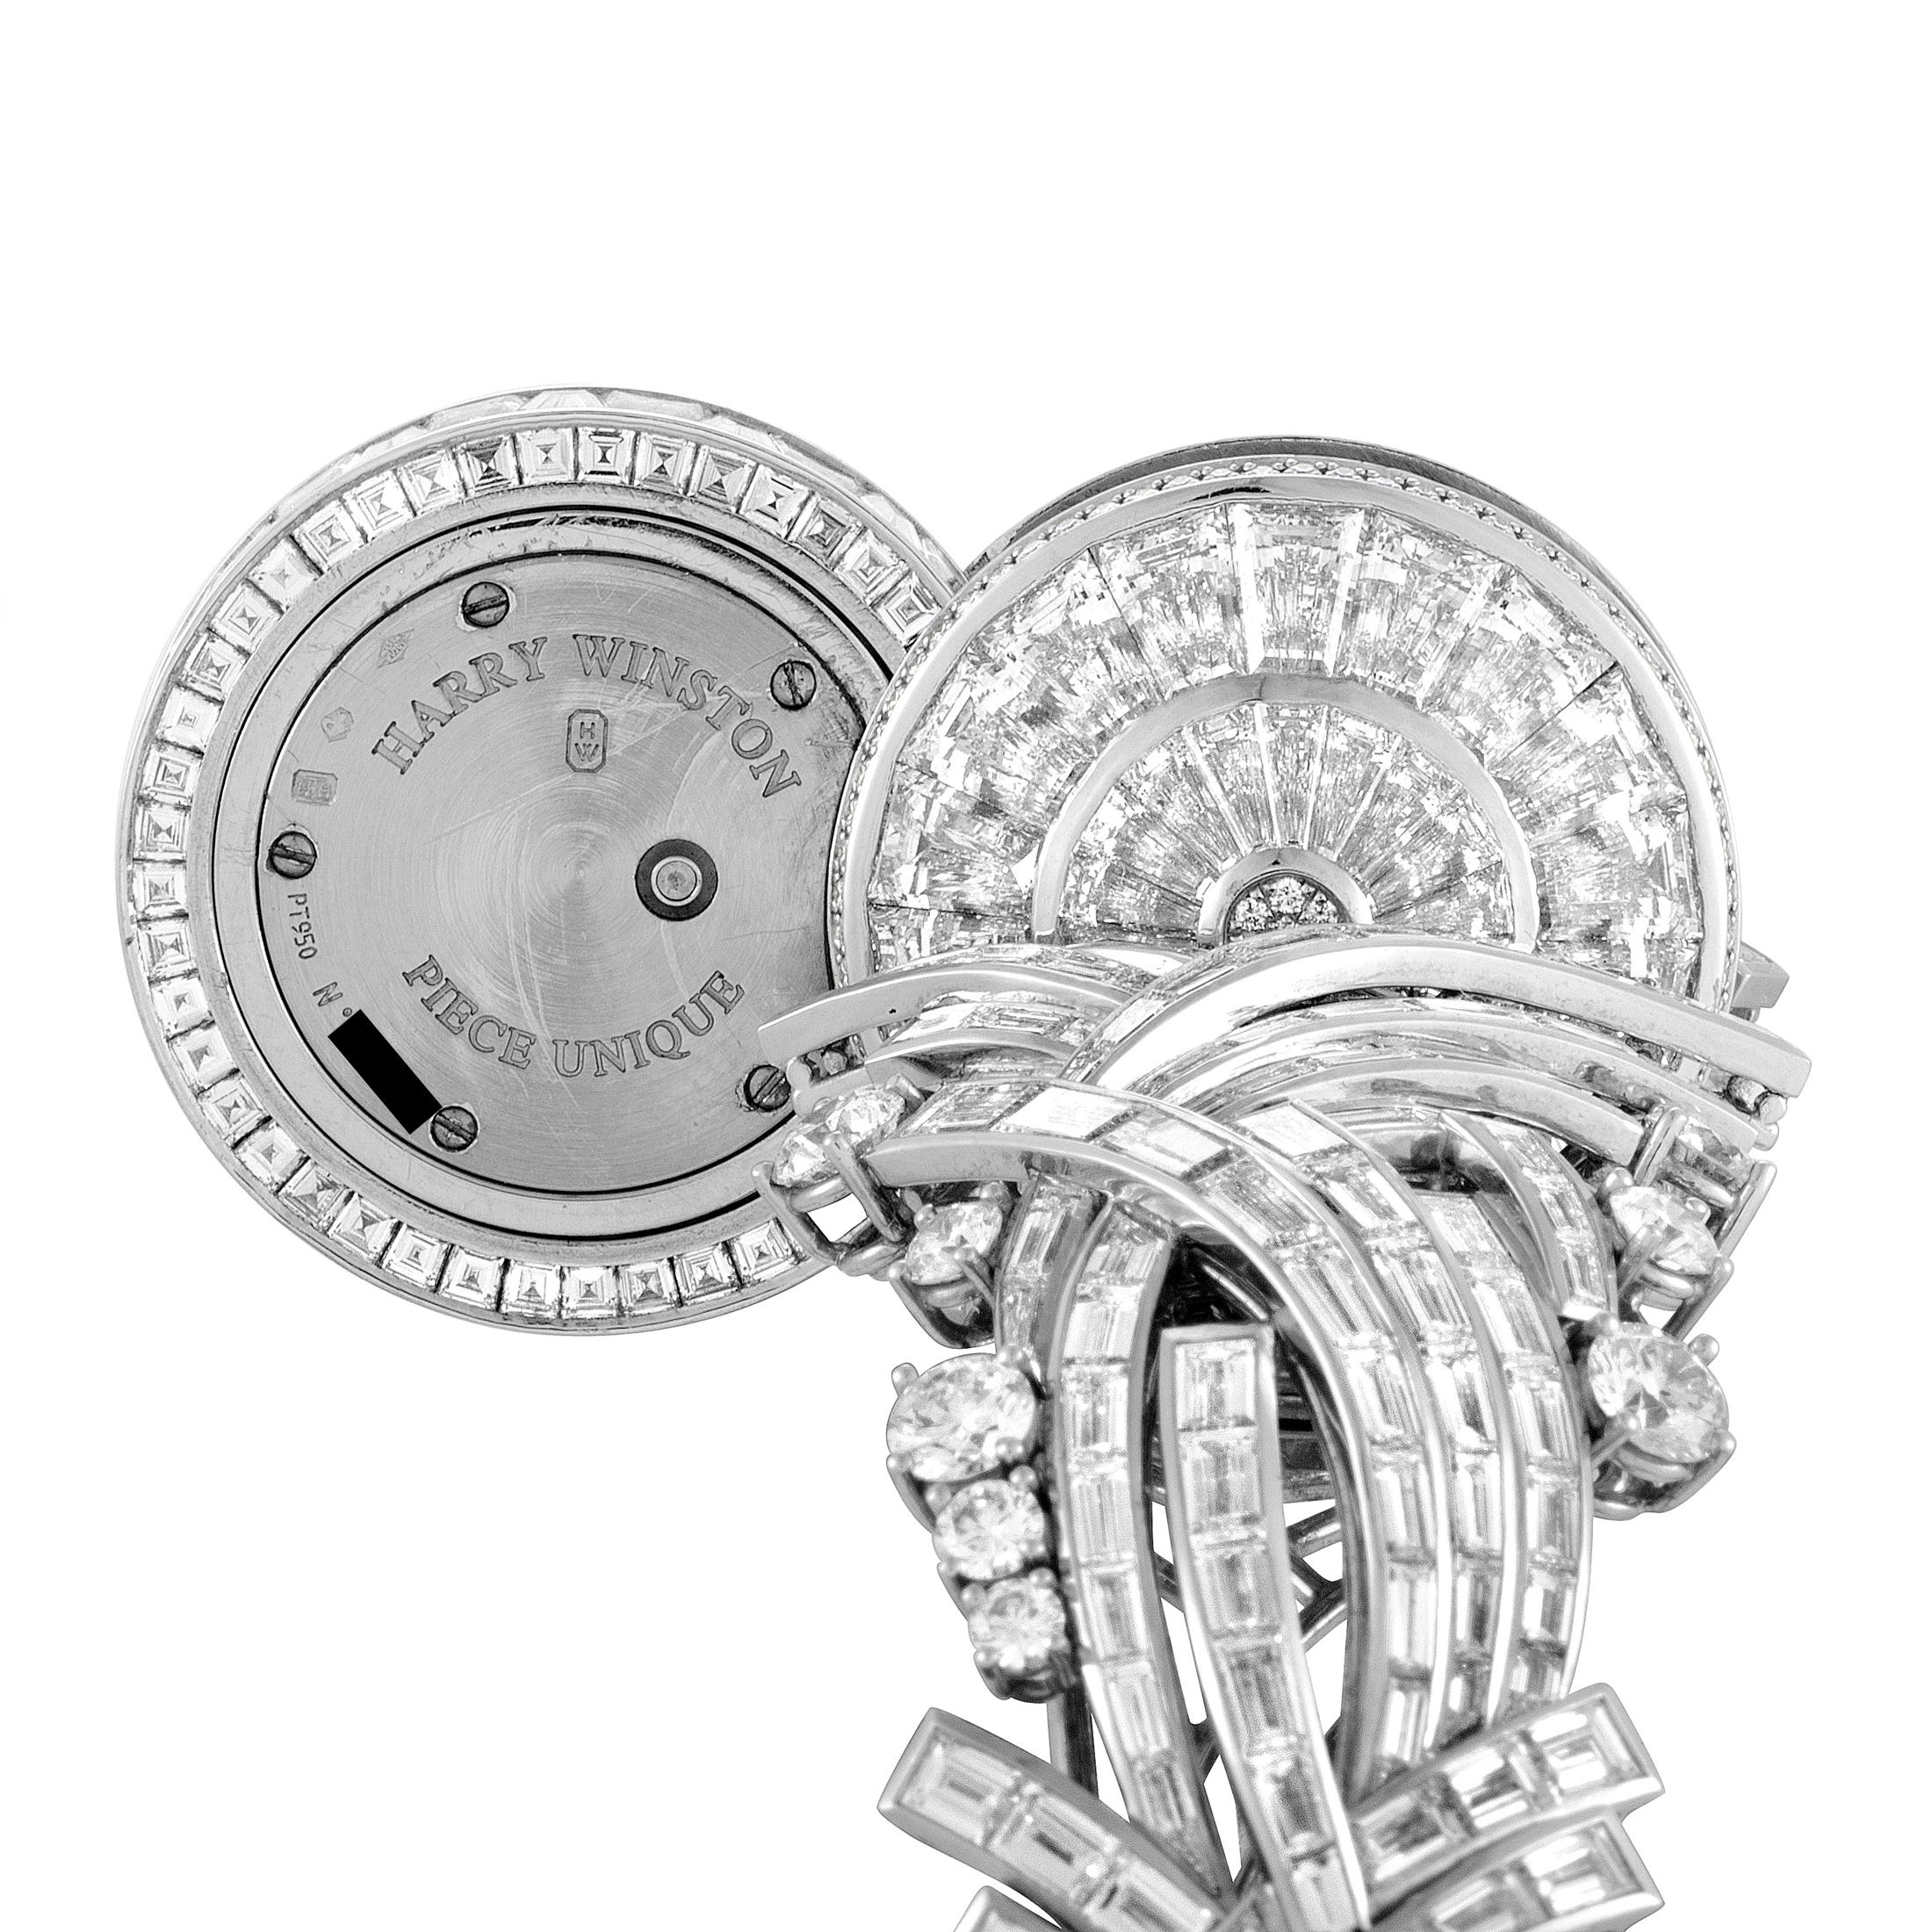 An exhilarating homage to the brand’s iconic reputation for amazing work with diamonds, this spellbinding platinum timepiece from Harry Winston boasts a neat case seamlessly concealed inside a gloriously resplendent and uncompromisingly lavish